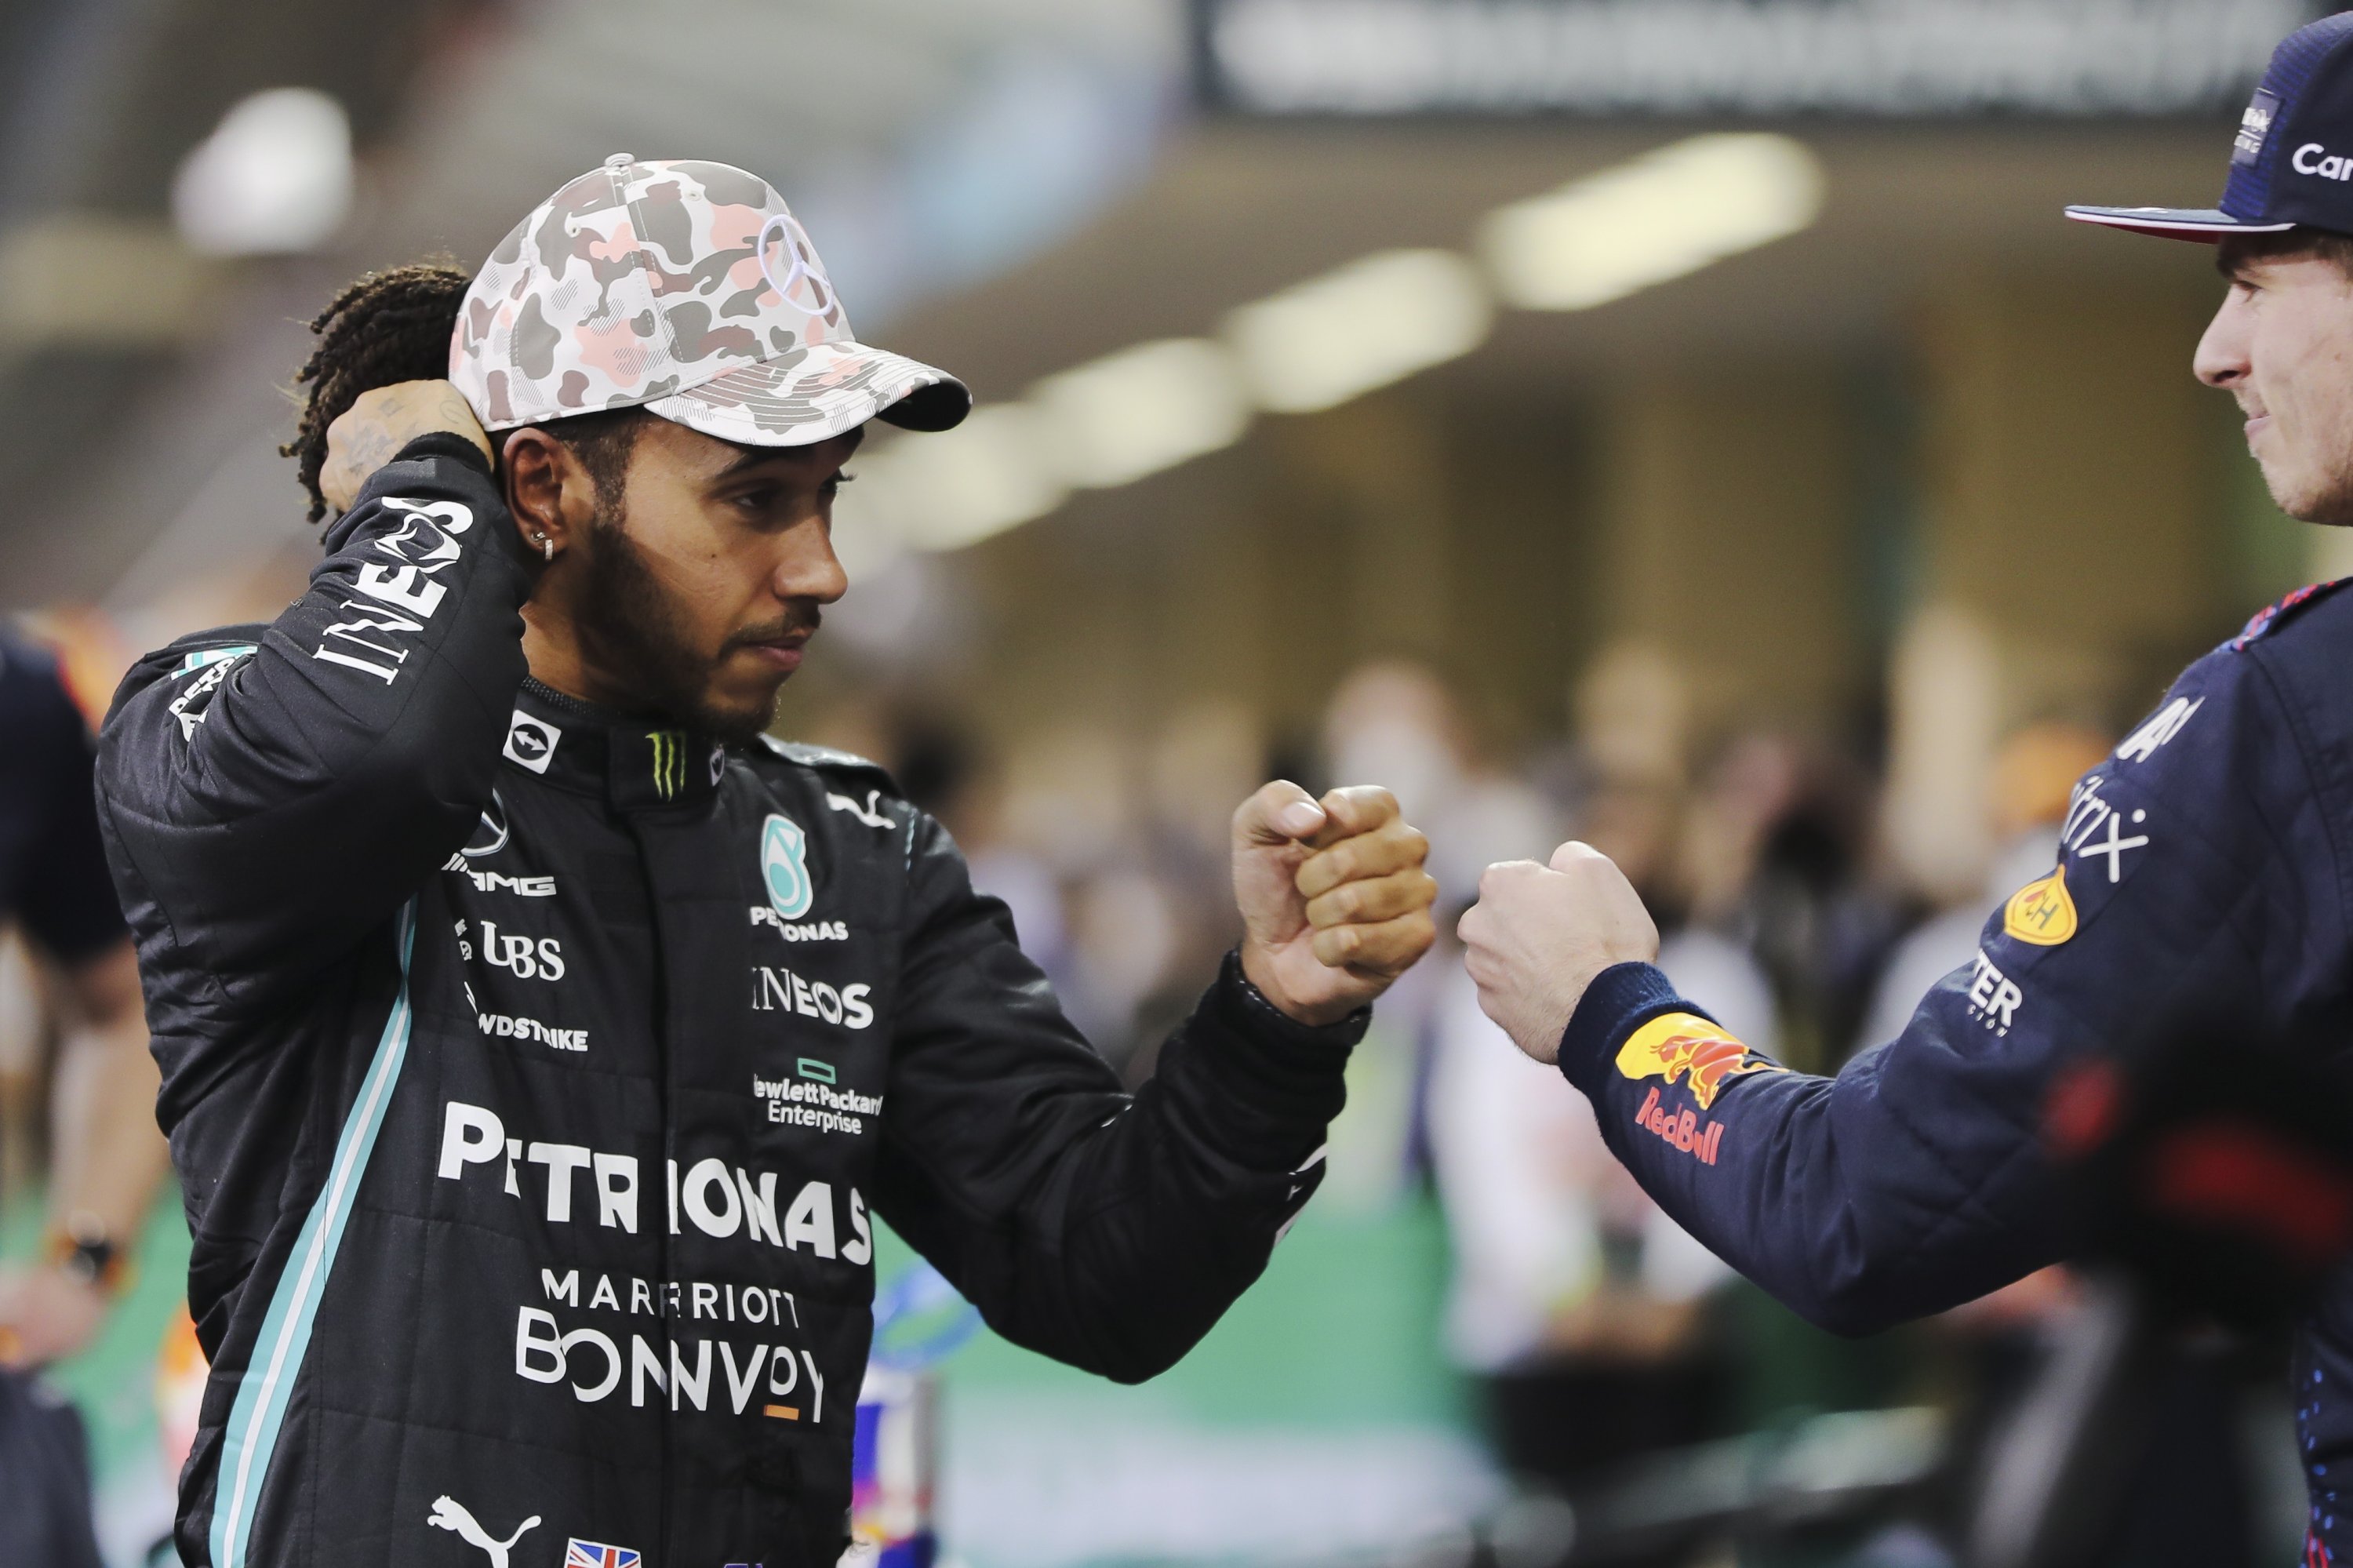 British Formula One driver Lewis Hamilton (L) of Mercedes-AMG Petronas and Dutch driver Max Verstappen (R) of Red Bull Racing react after the qualifying session of the Formula One Grand Prix of Abu Dhabi at Yas Marina Circuit in Abu Dhabi, United Arab Emirates, Dec. 11, 2021. (EPA Photo)